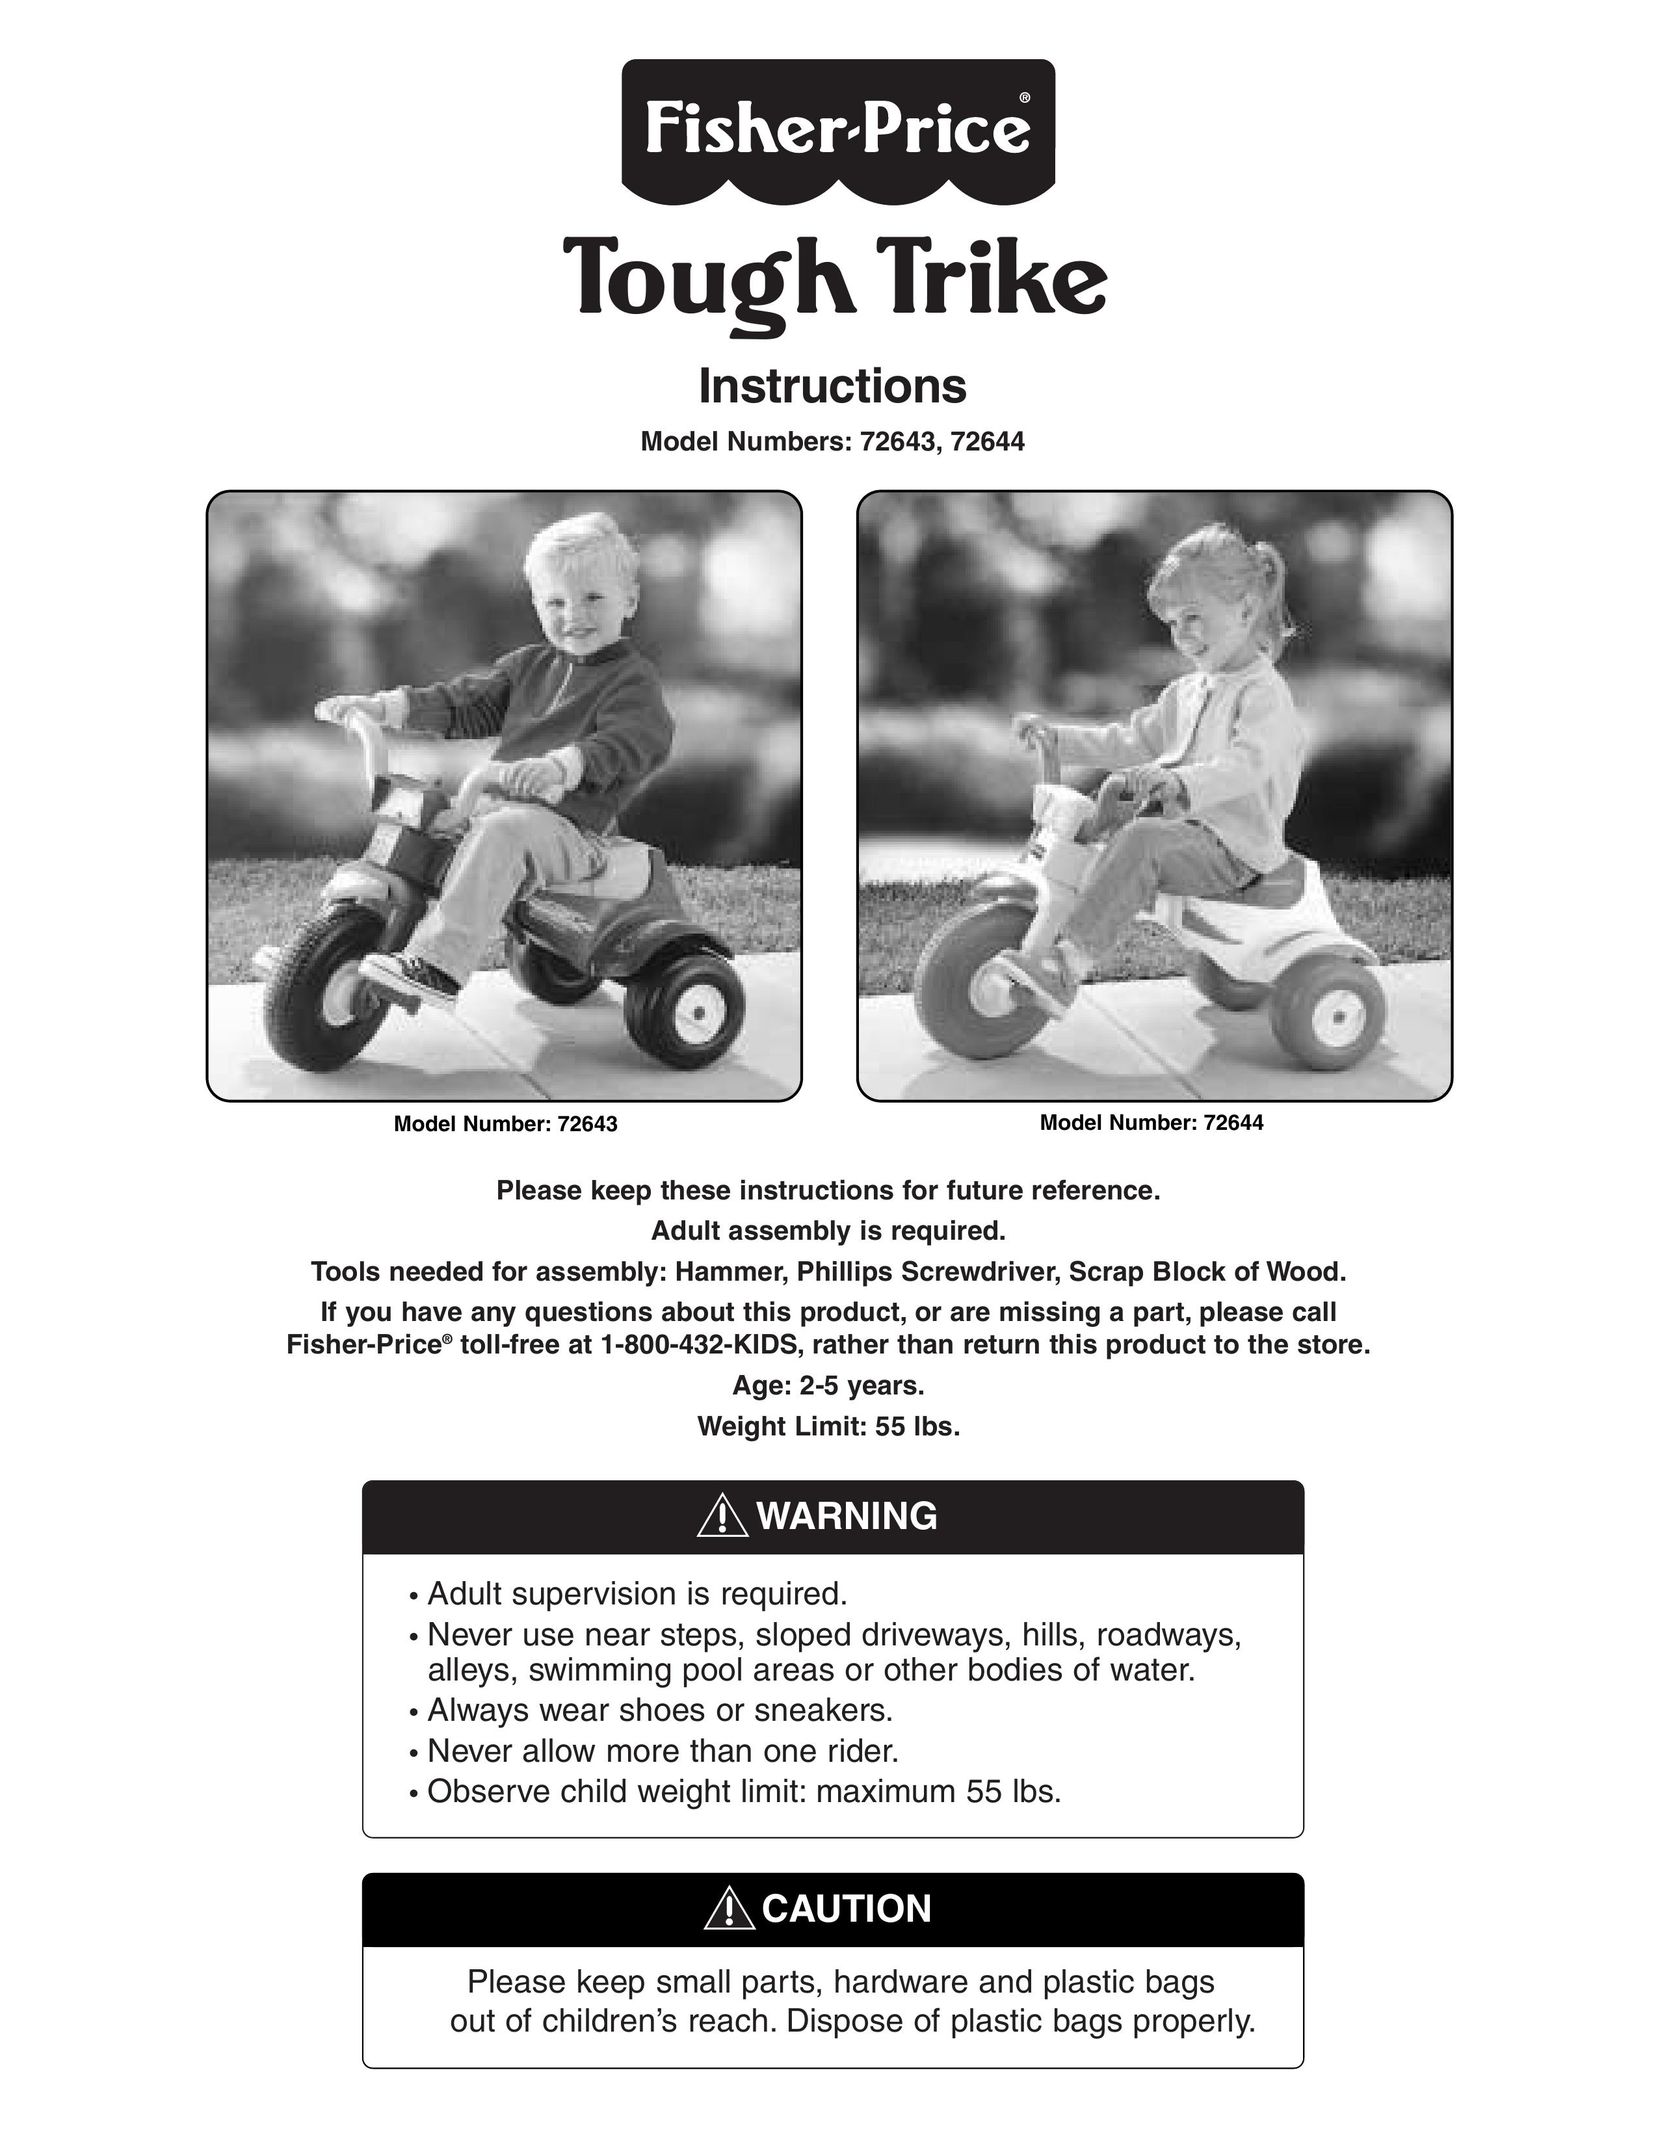 Fisher-Price 72643 Riding Toy User Manual